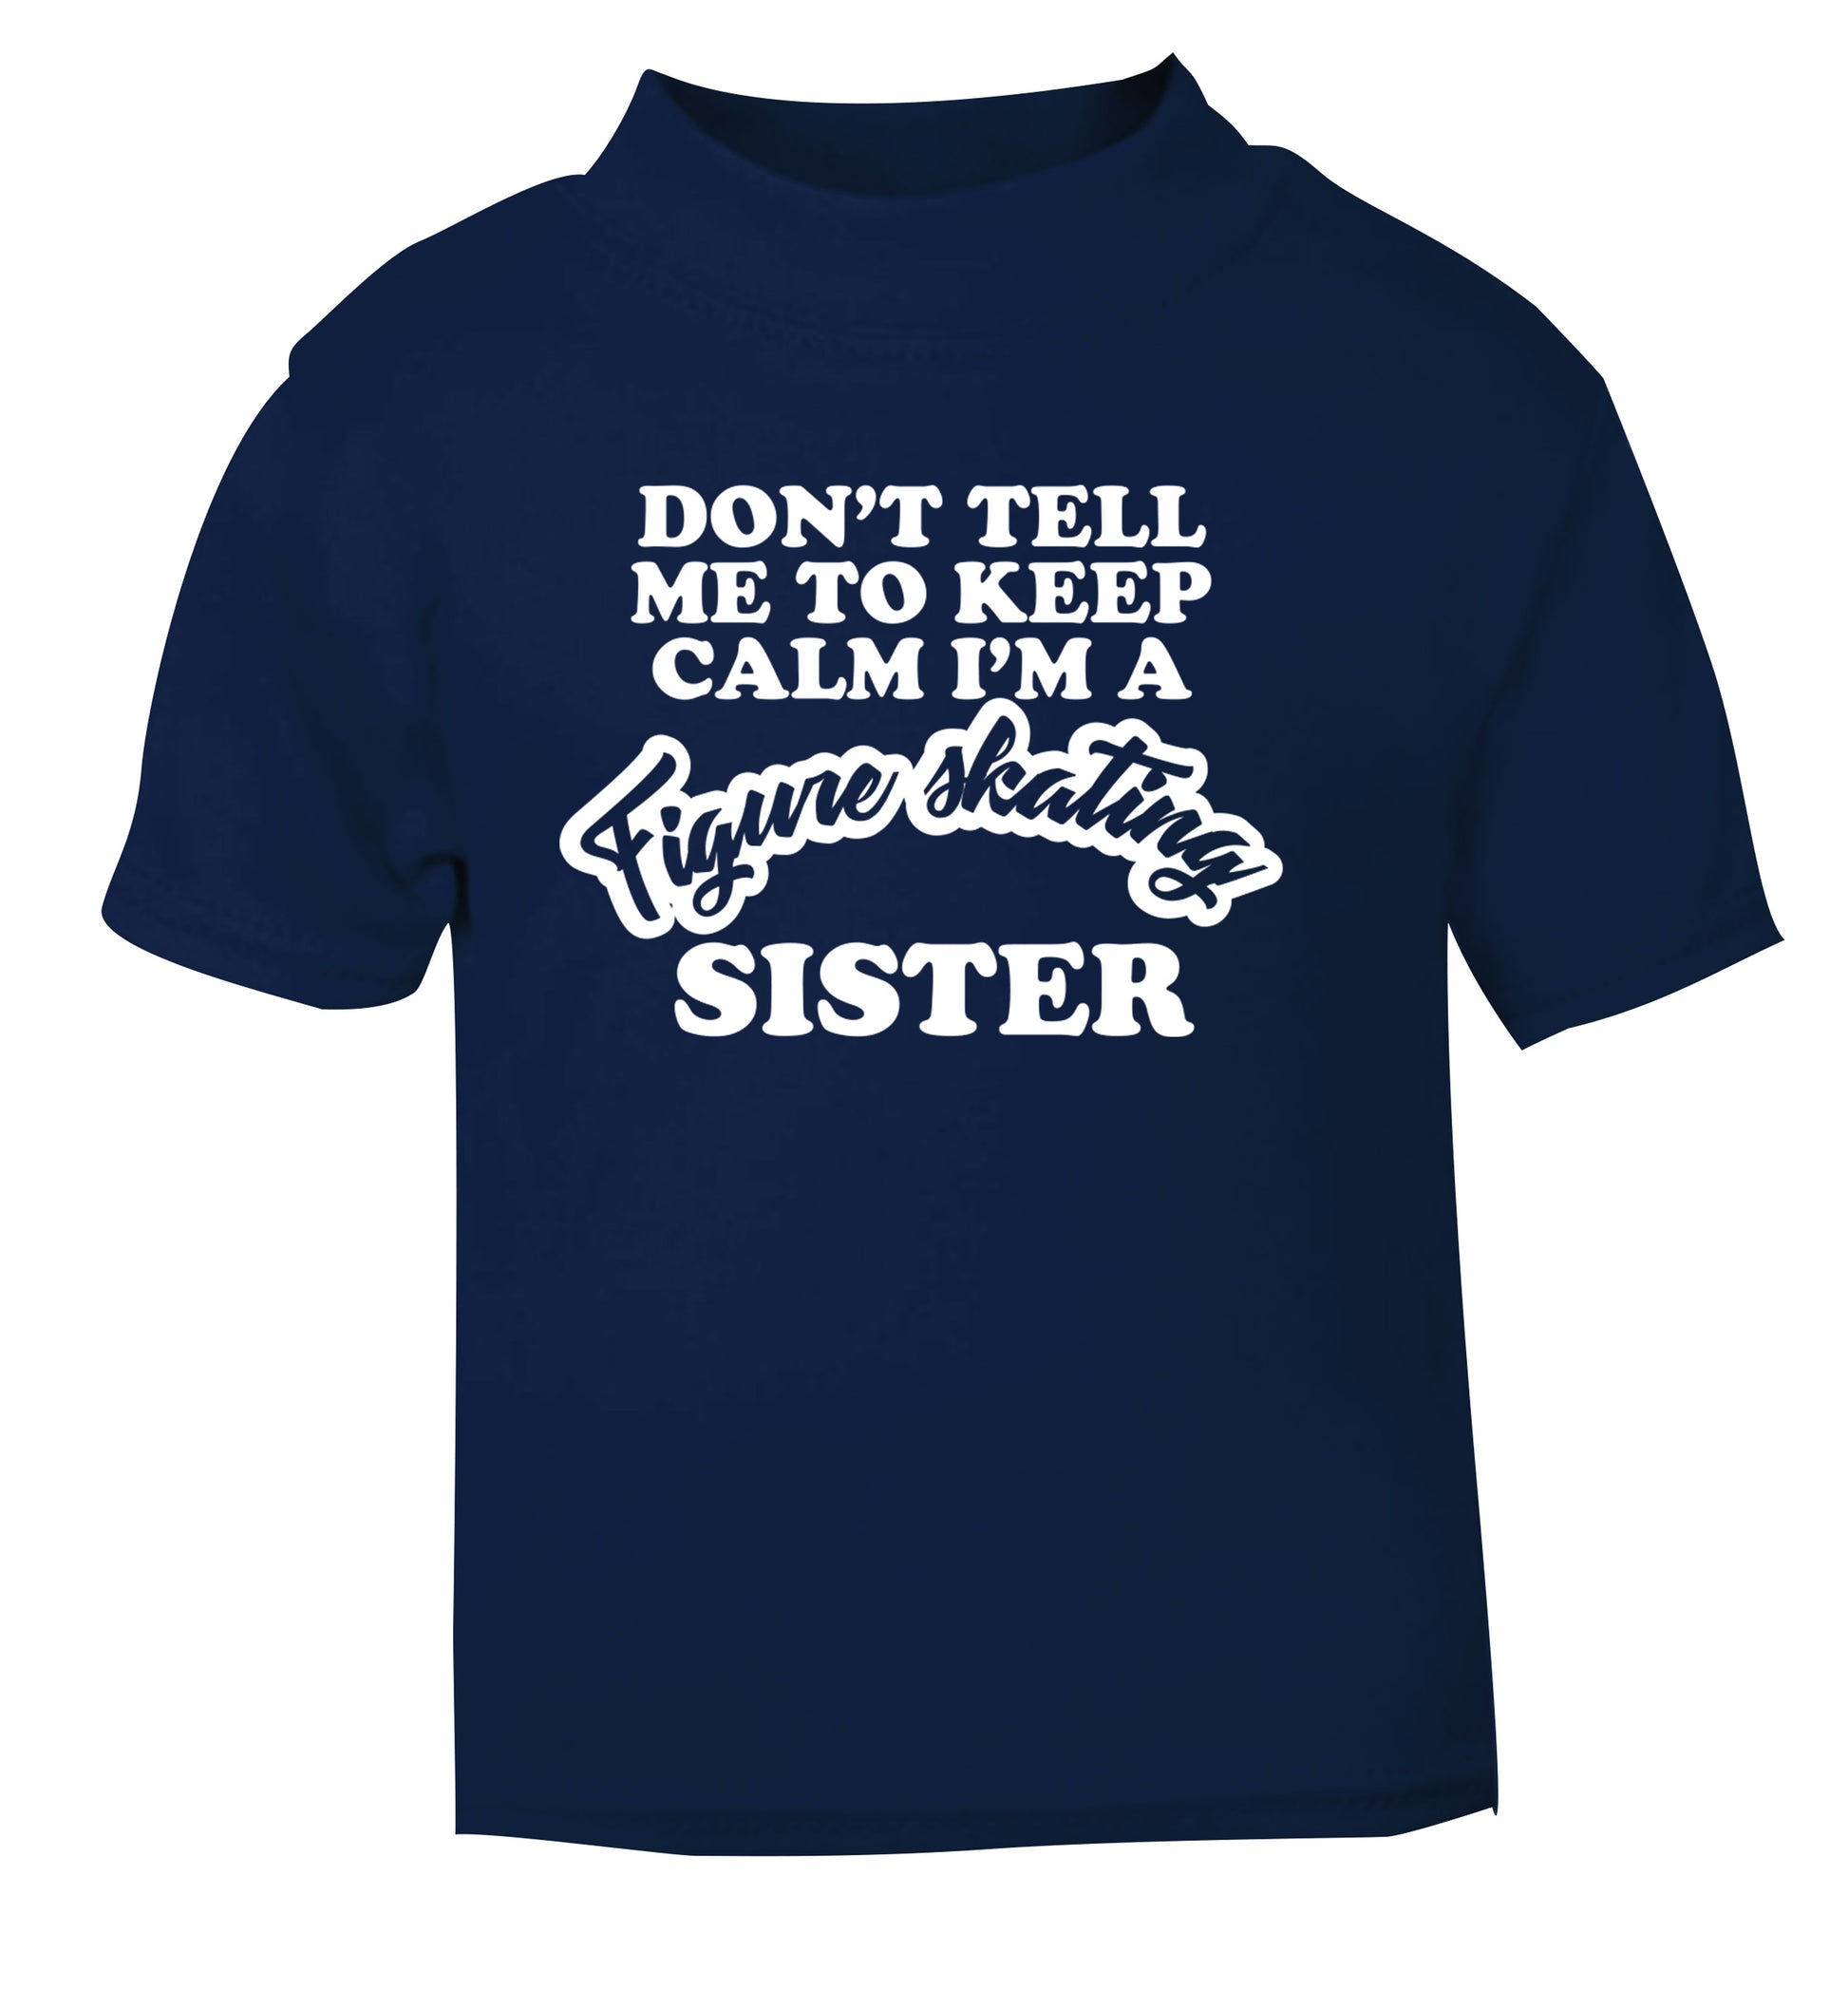 Don't tell me to keep calm I'm a figure skating sister navy Baby Toddler Tshirt 2 Years